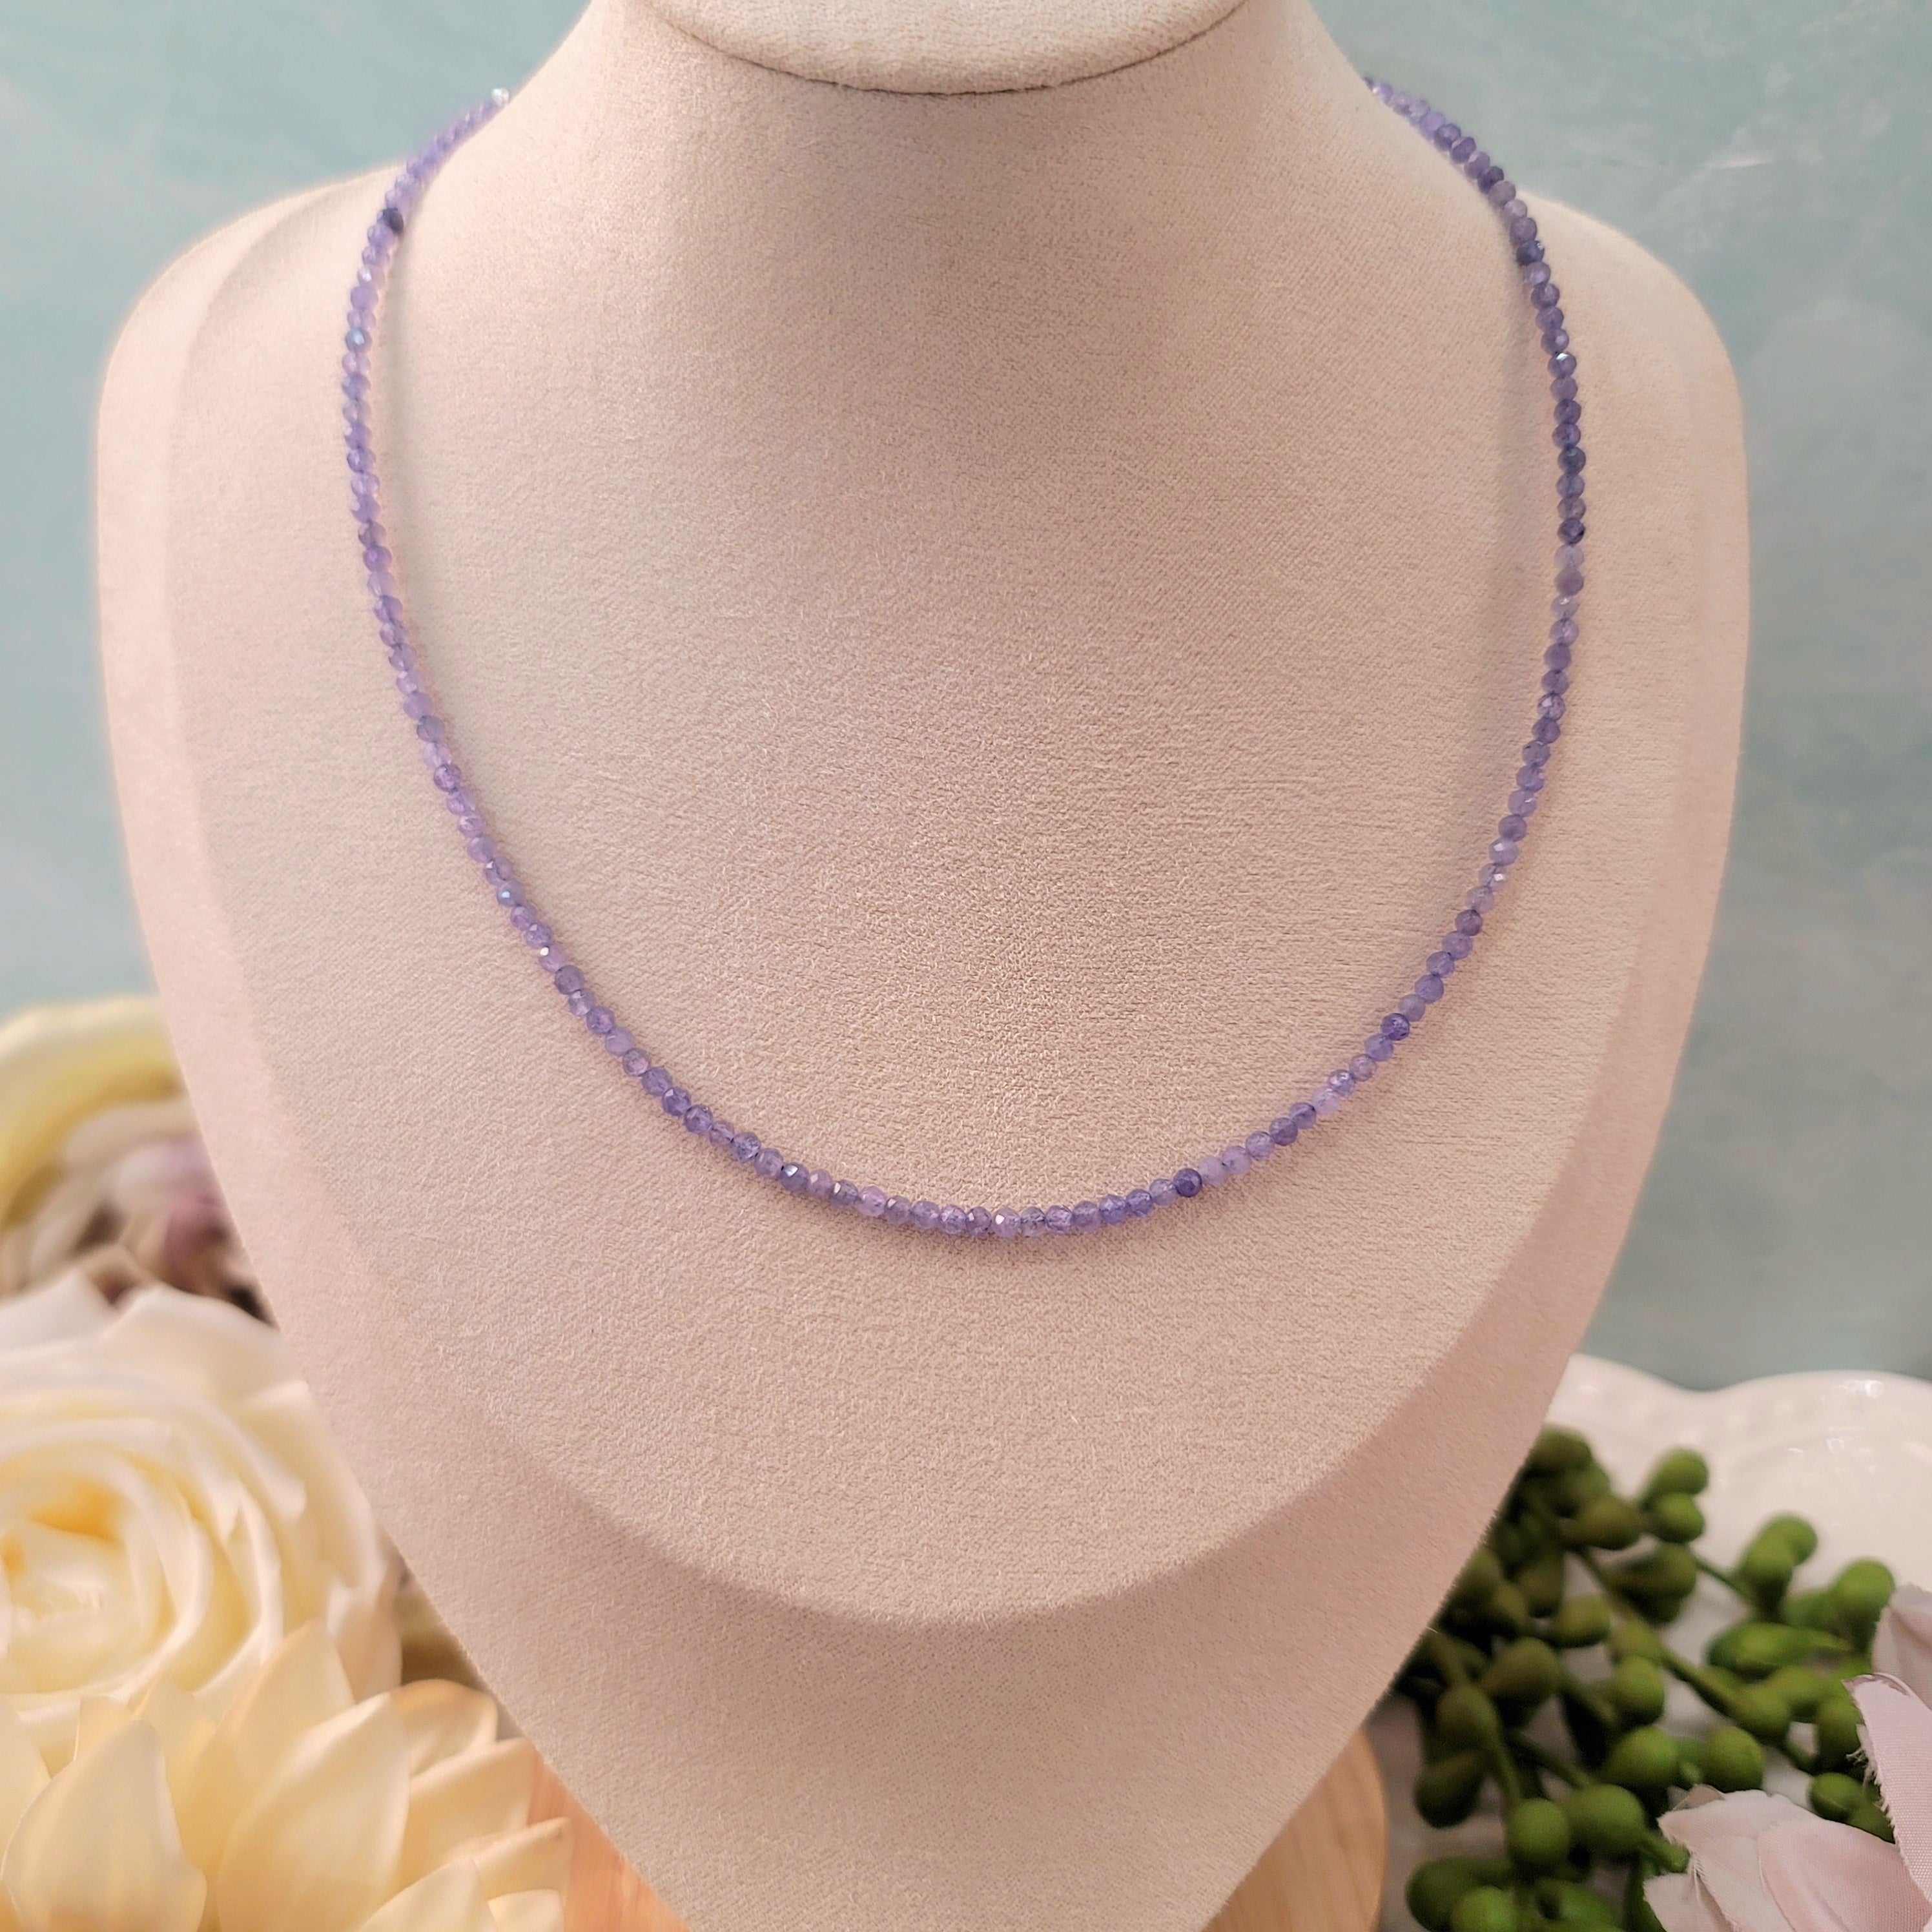 Tanzanite Micro Faceted Choker/Layering Necklace for Compassion, Intuition & Raising your Vibration